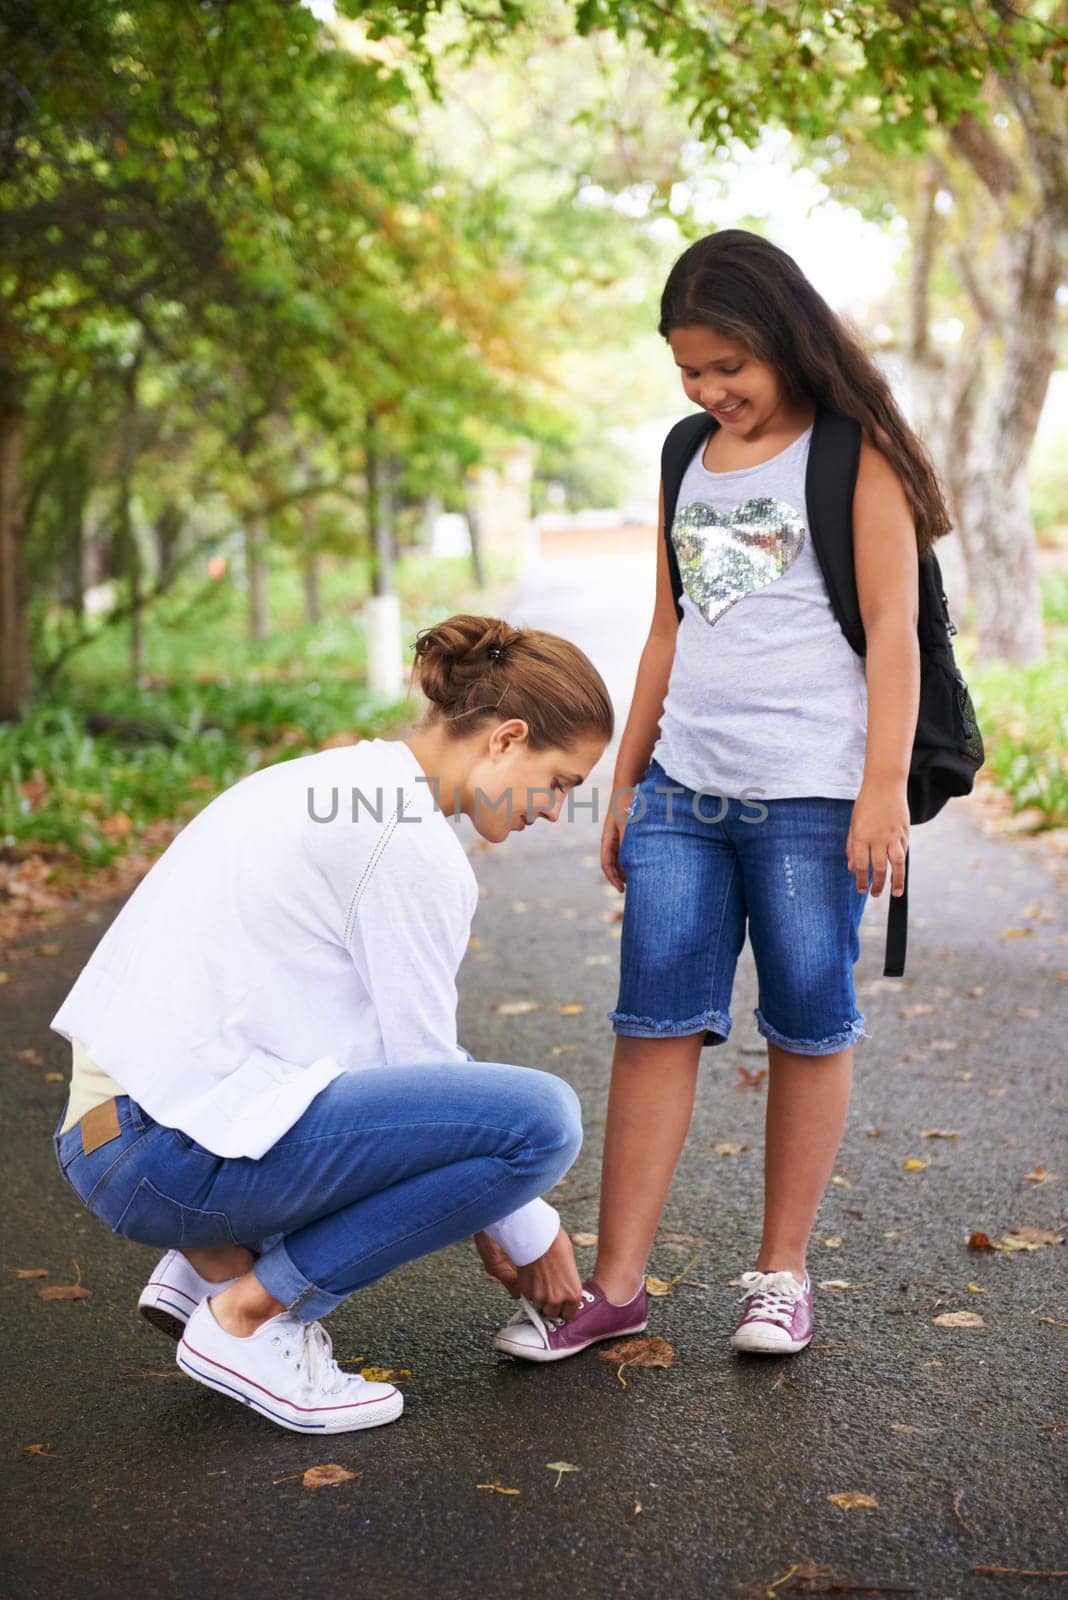 Woman, teacher and tying student shoes in park for back to school, learning or education in nature. Female person teaching little girl to tie laces on asphalt path, road or outdoor street in woods.